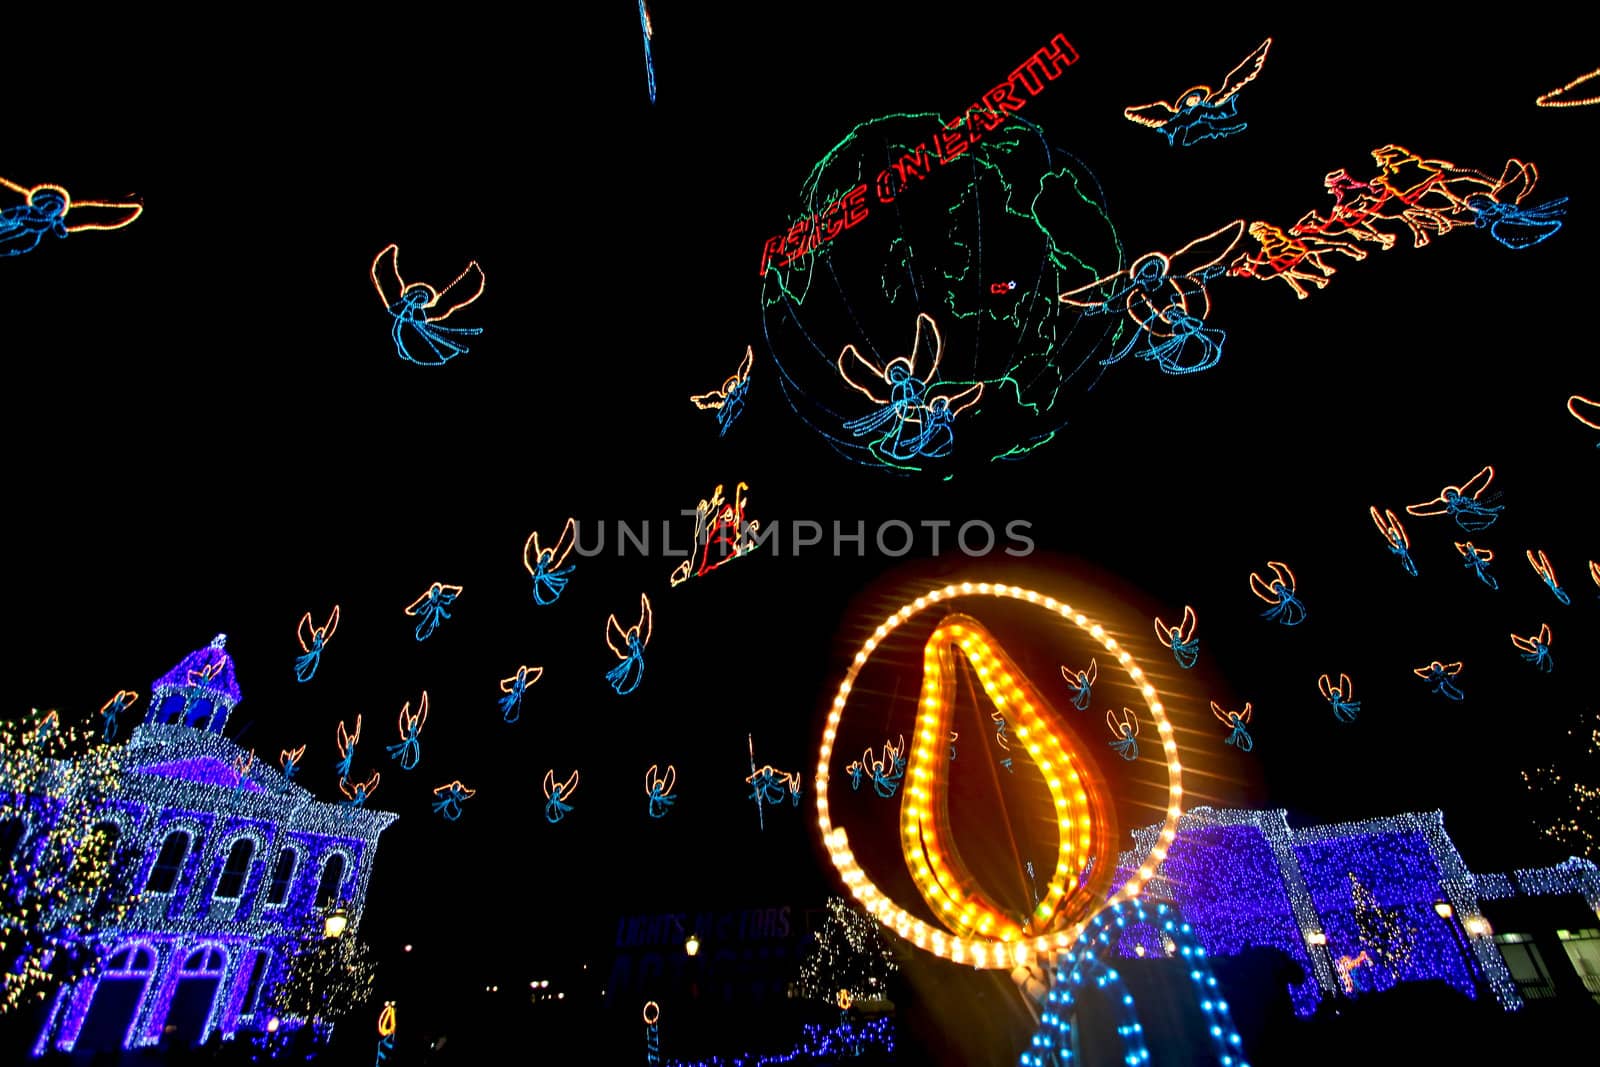 The Osborne Family Spectacle of Dancing Lights by quackersnaps